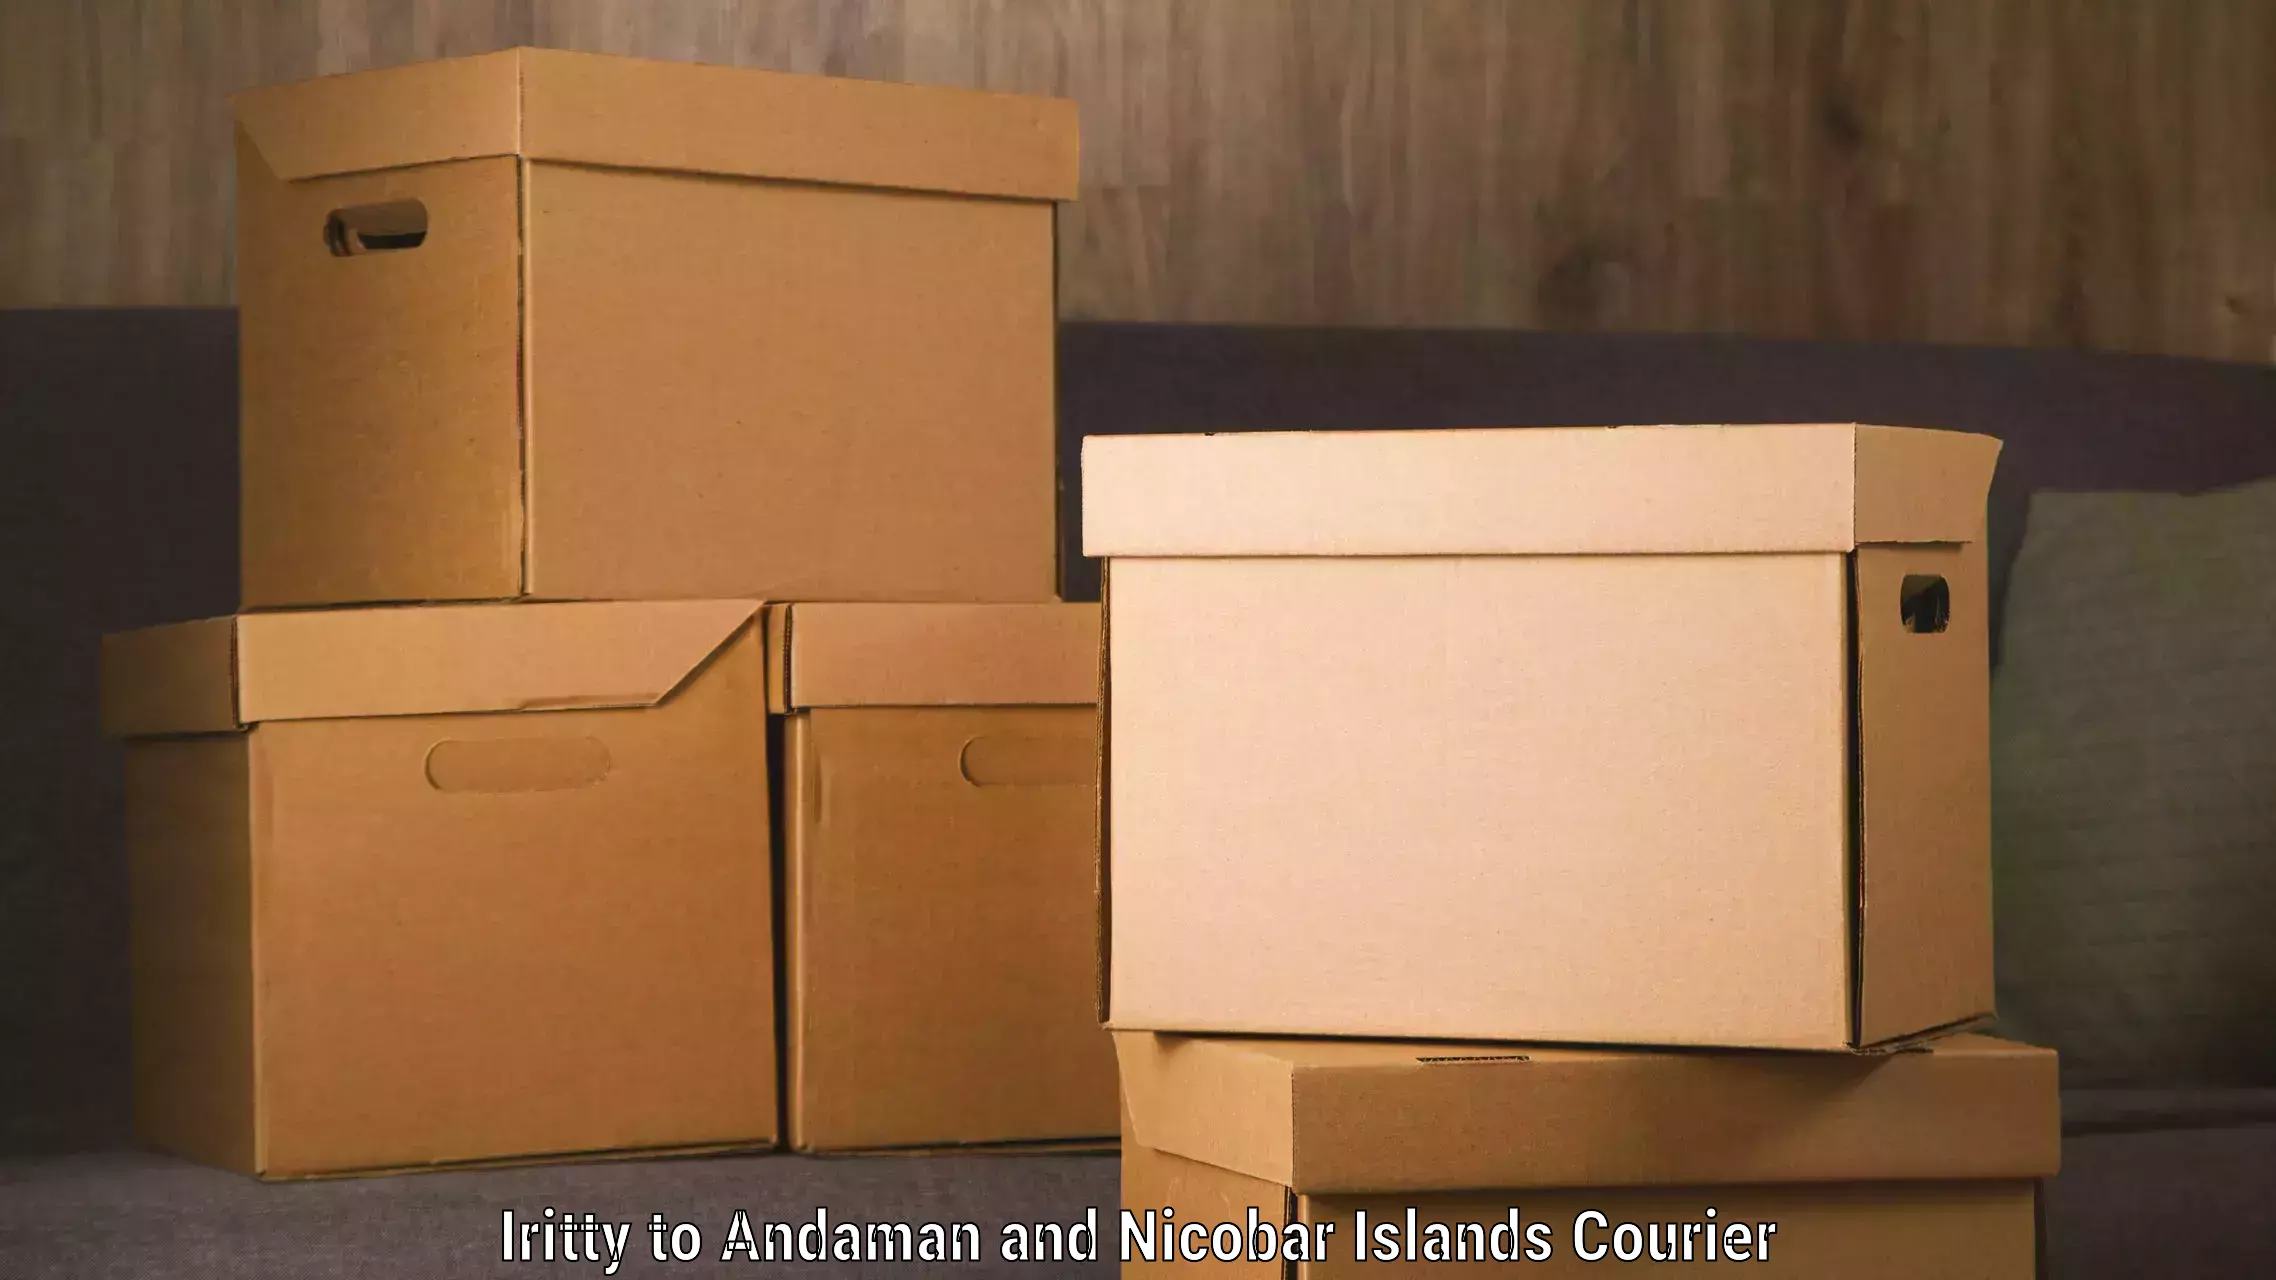 Advanced delivery network Iritty to Andaman and Nicobar Islands